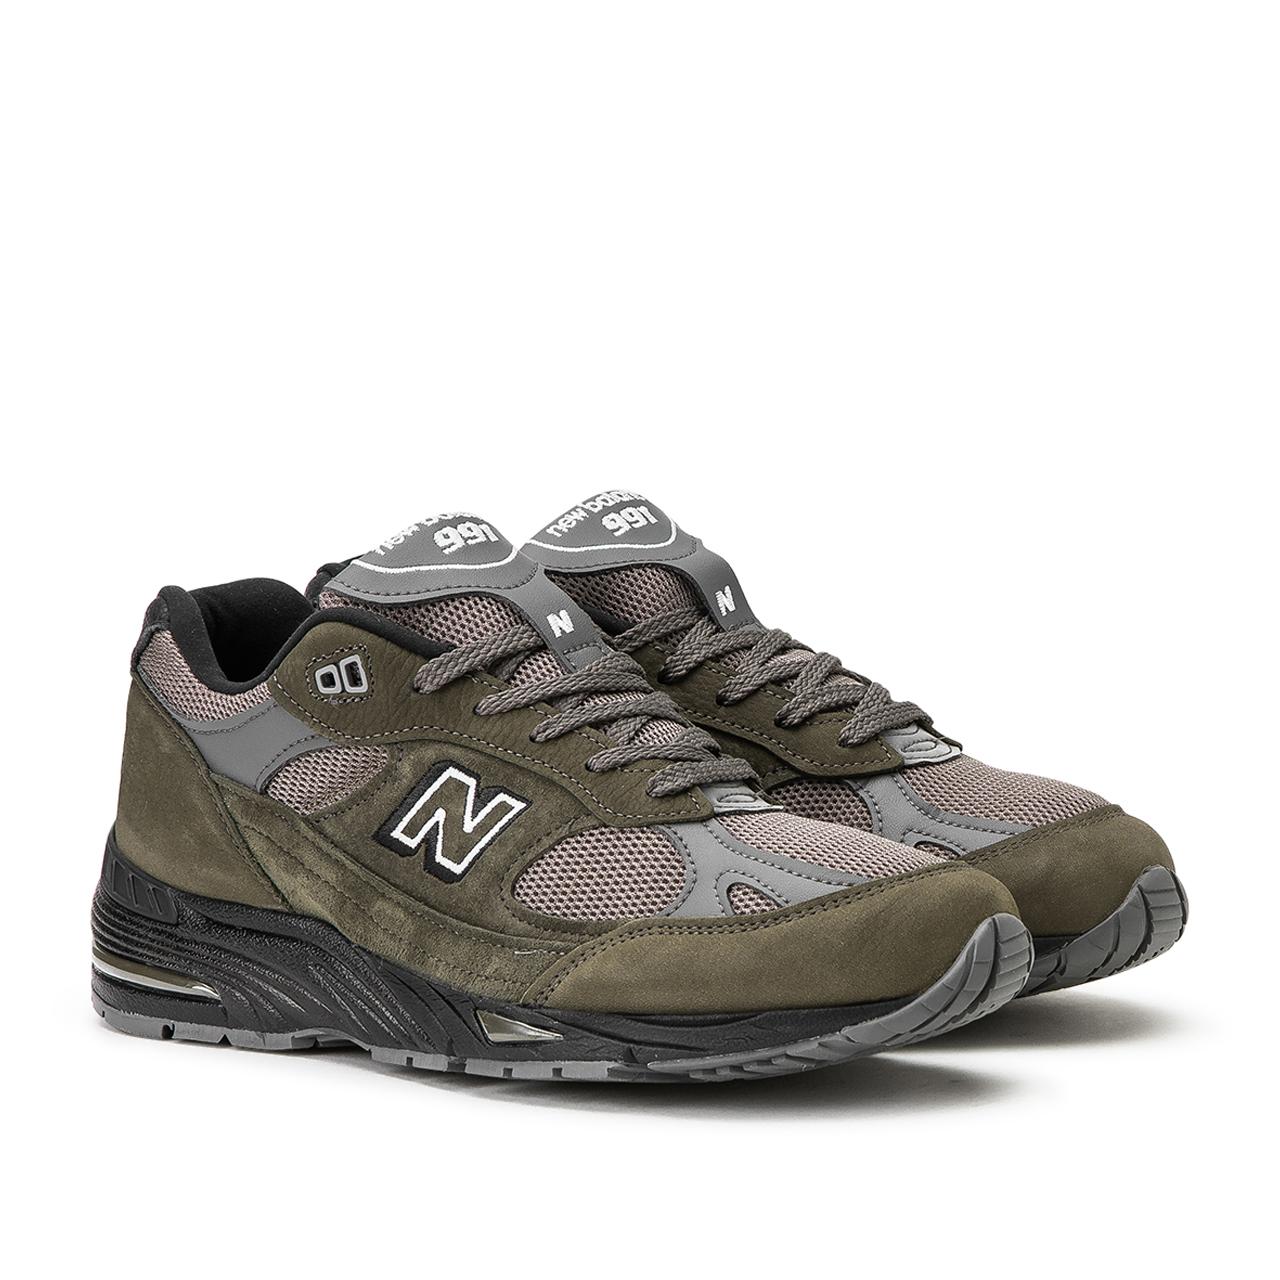 New Balance 911 Best Sale, UP TO 60% OFF